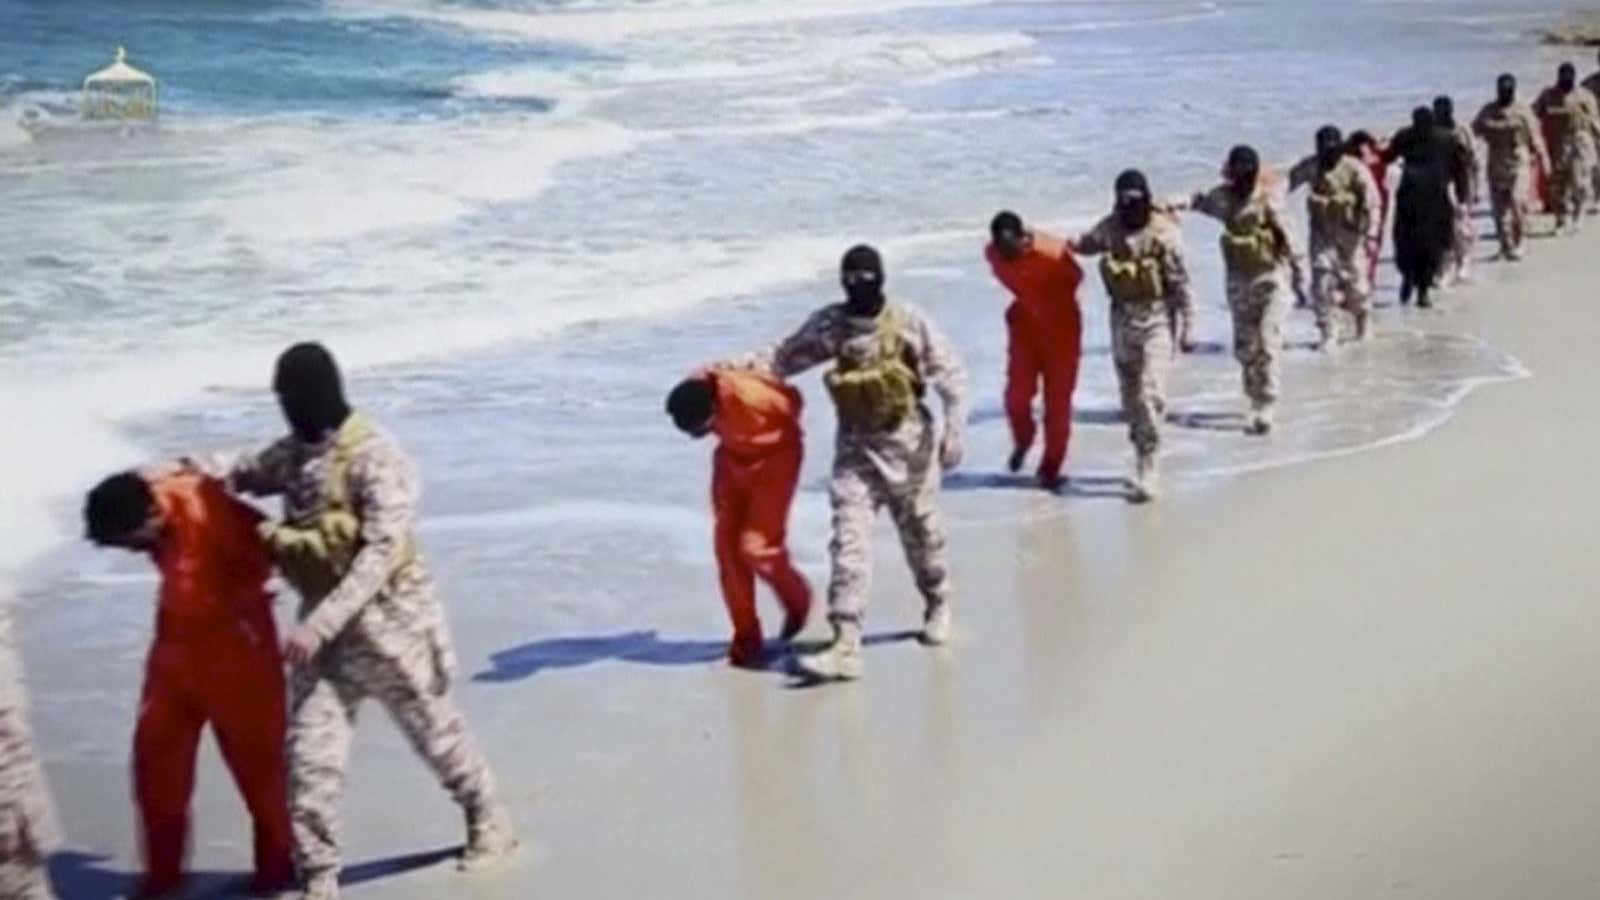 Islamic State militants lead what are said to be Ethiopian Christians along a beach in Wilayat Barqa, in this still image from an undated video made available on a social media website.